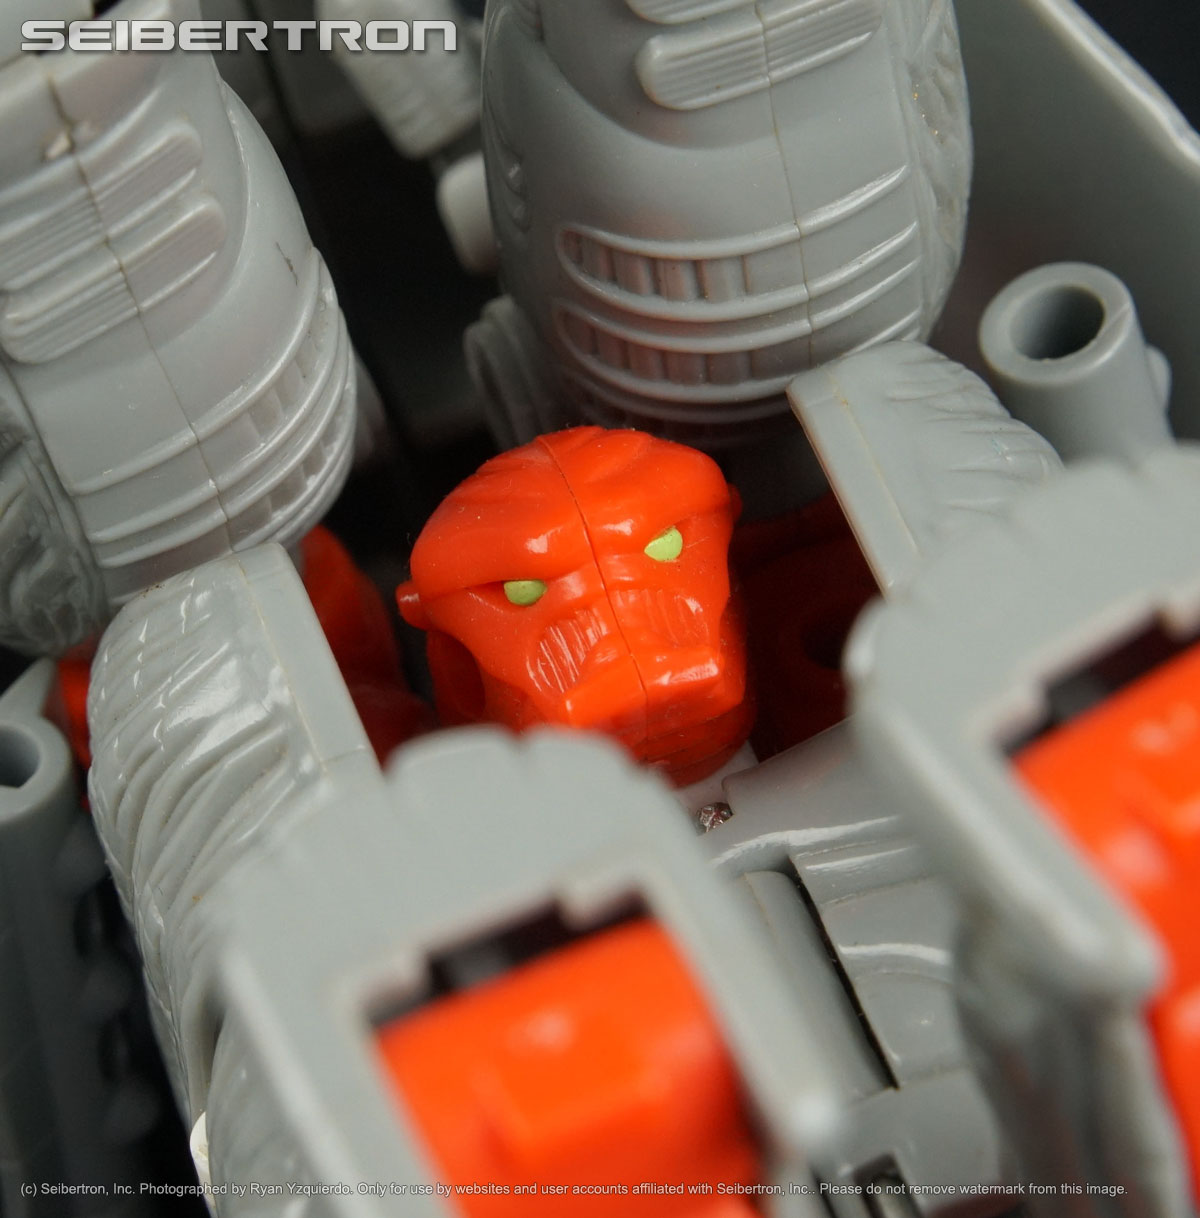 Transformers, Gobots, Masters of the Universe, Teenage Mutant Ninja Turtles, Shopkins, Comic Books, and other items items listings from Seibertron.com: IRONHIDE Transformers Beast Wars 1997 complete Deluxe Magnaboss Hasbro/Kenner